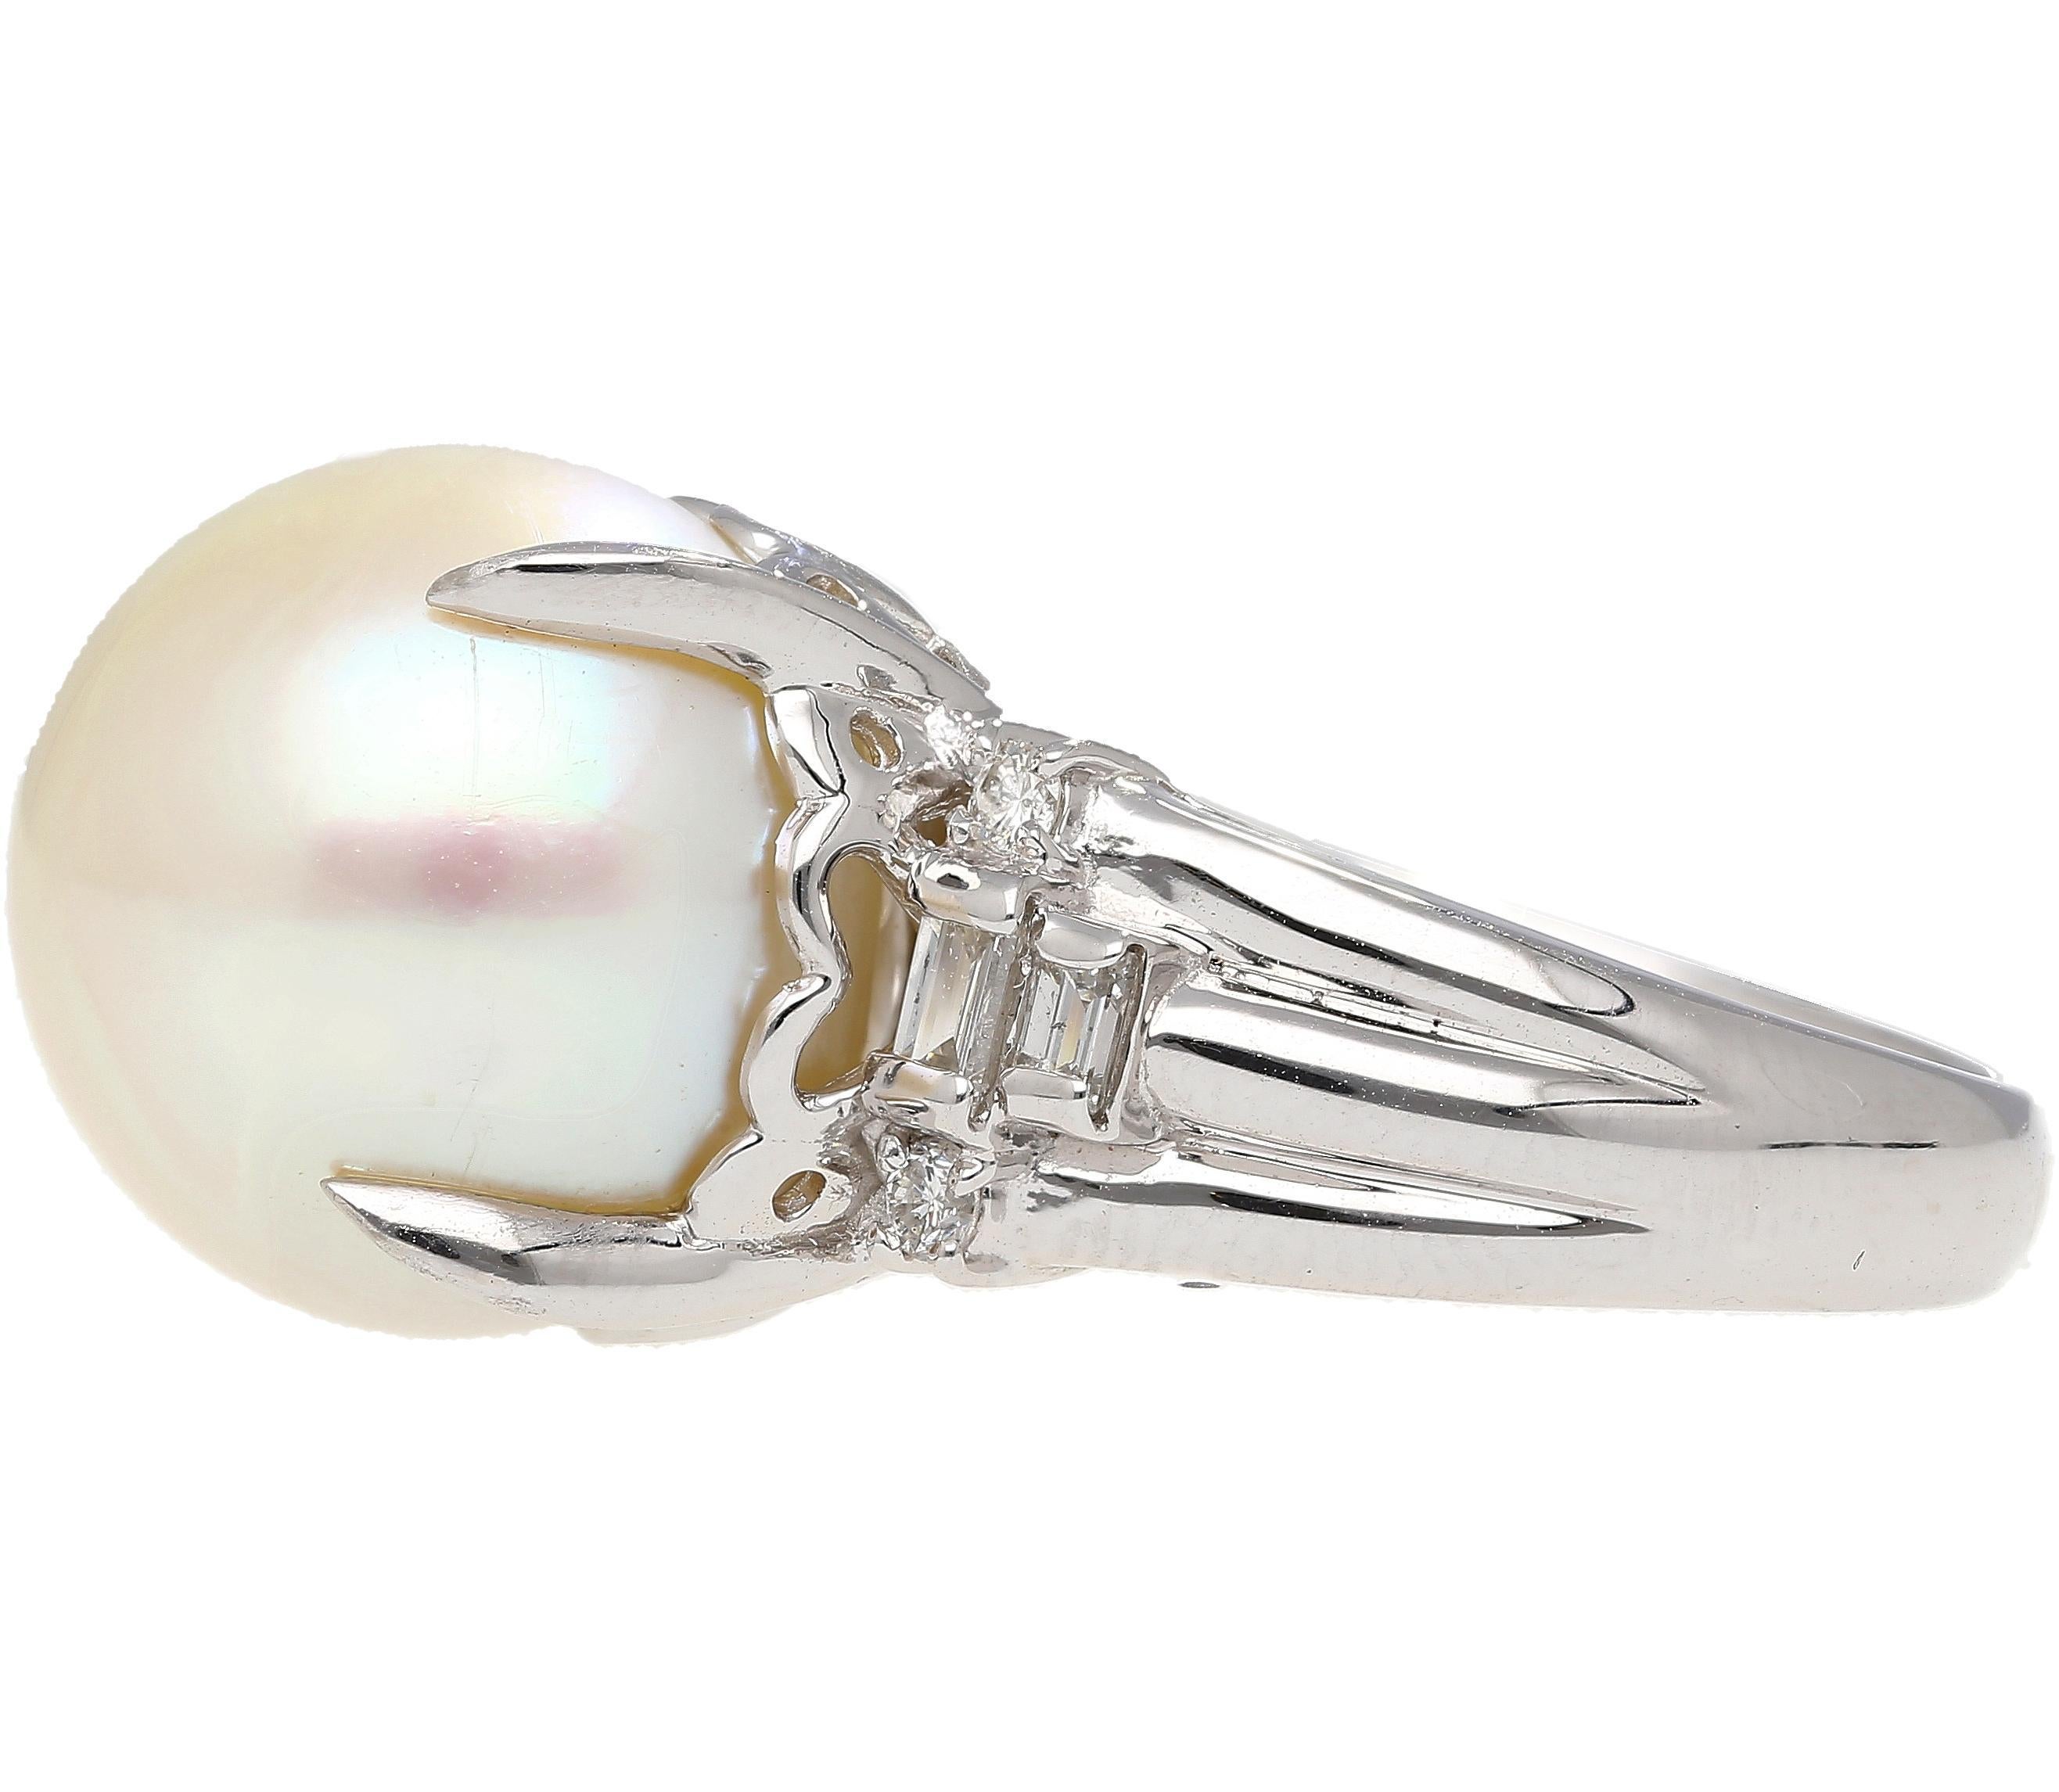 Women's 15mm South Sea Pearl and Diamond Platinum Cocktail Ring with Heart Shape Design For Sale